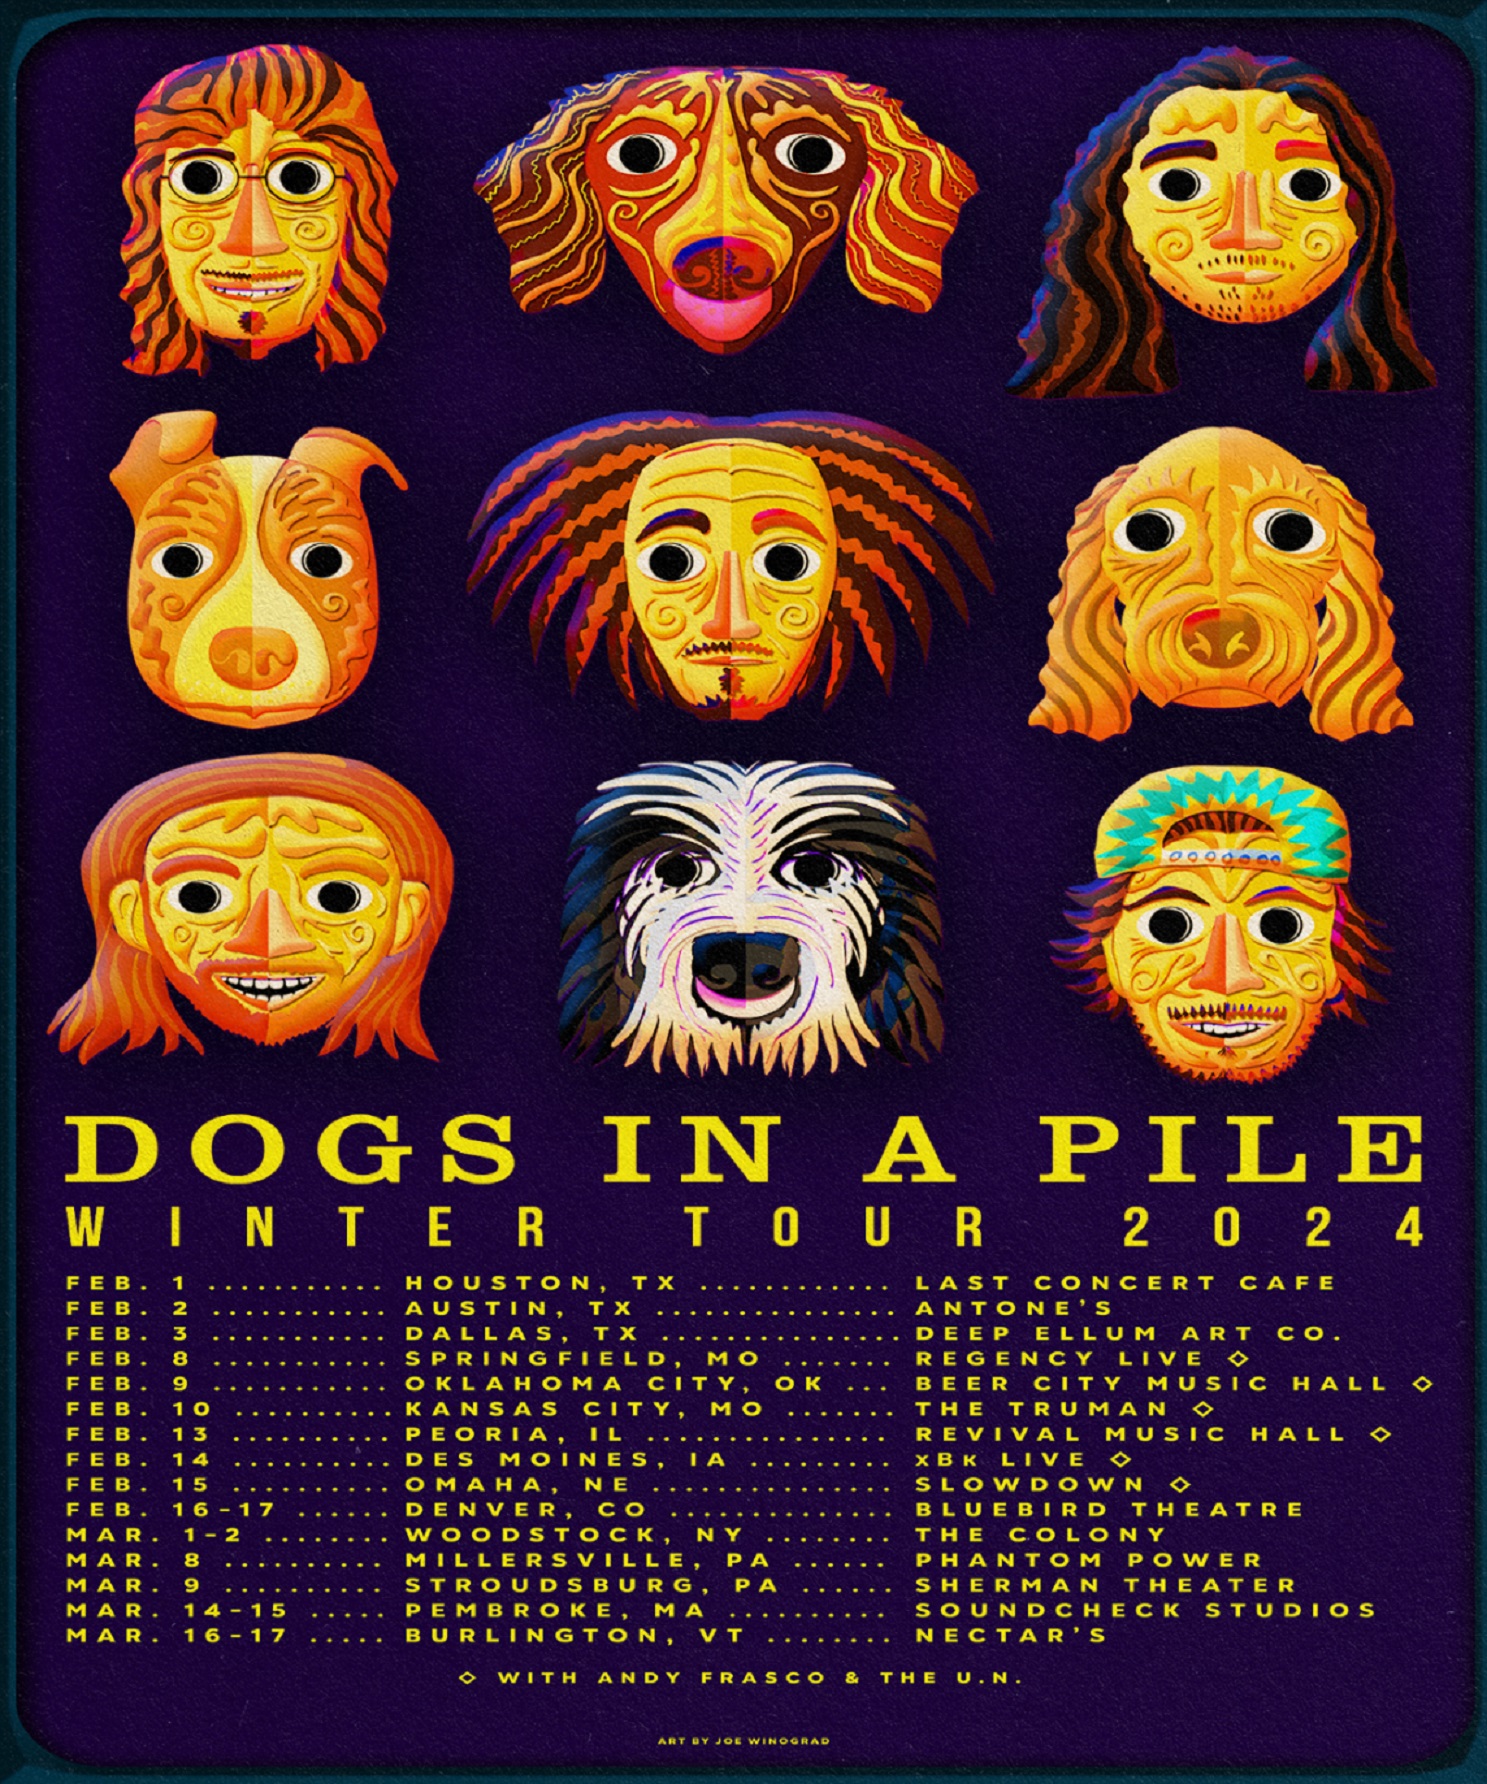 DOGS IN A PILE KICK 2024 OFF WITH CROSS COUNTRY WINTER TOUR